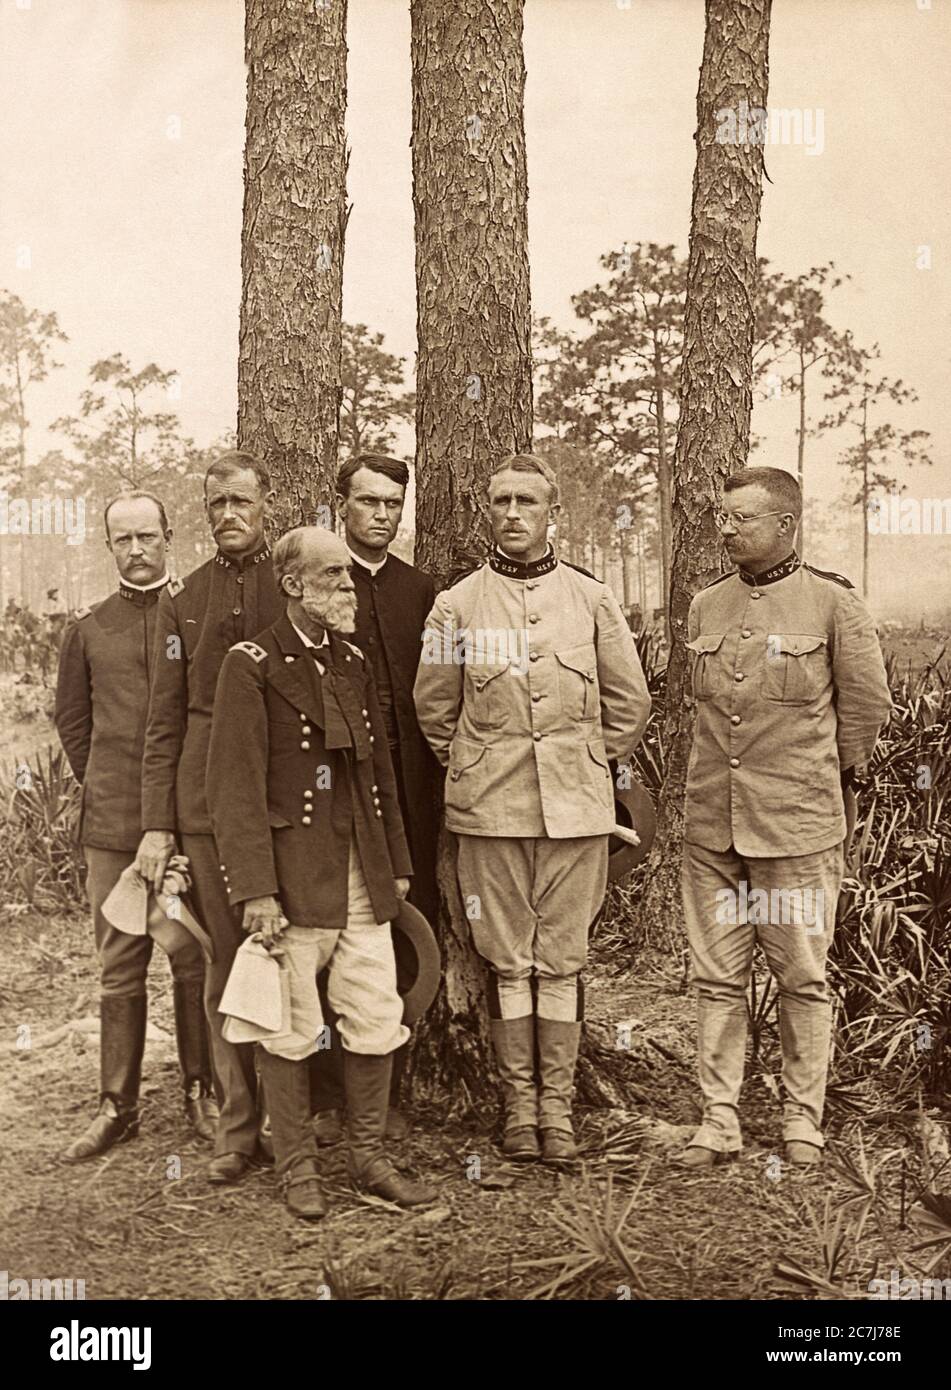 Staff of the 1st US Volunteer Regiment, the 'Rough Riders', (front row, right to left): Theodore Roosevelt, Leonard Wood and former Civil War Confederate General, Joseph Wheeler, (Back row, right to left): Chaplain Henry A. Brown, Major Alexander Oswald Brodie and Major George Dunn, Tampa, Florida, USA, Underwood & Underwood, 1898 Stock Photo